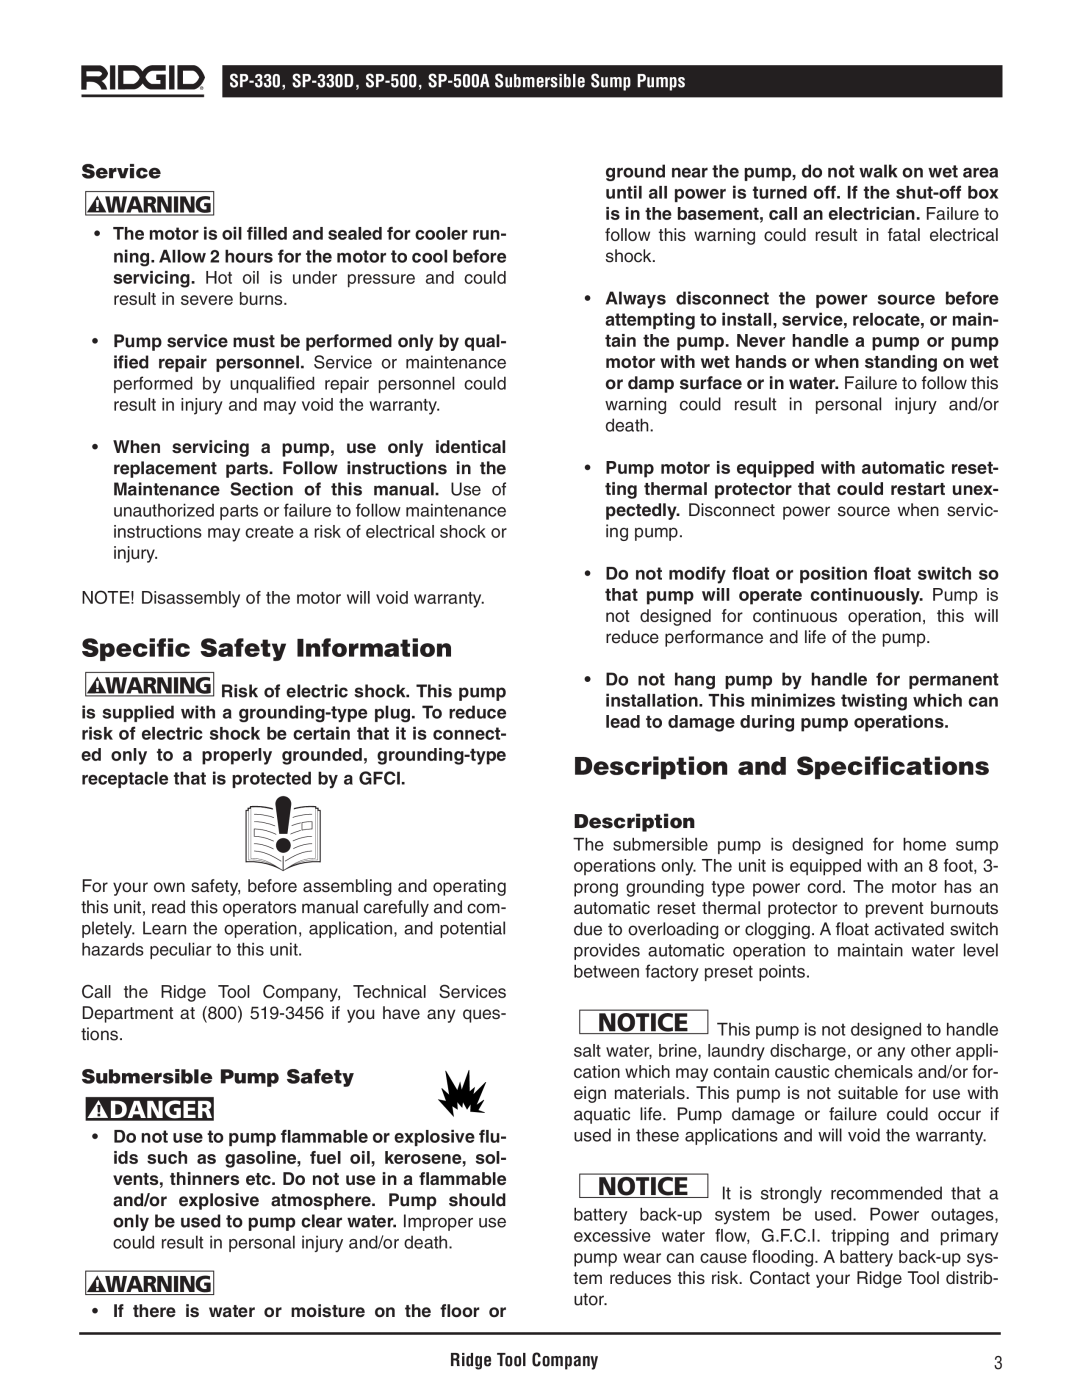 RIDGID SP-500 manual Specific Safety Information, Description and Specifications, Service, Submersible Pump Safety, Danger 